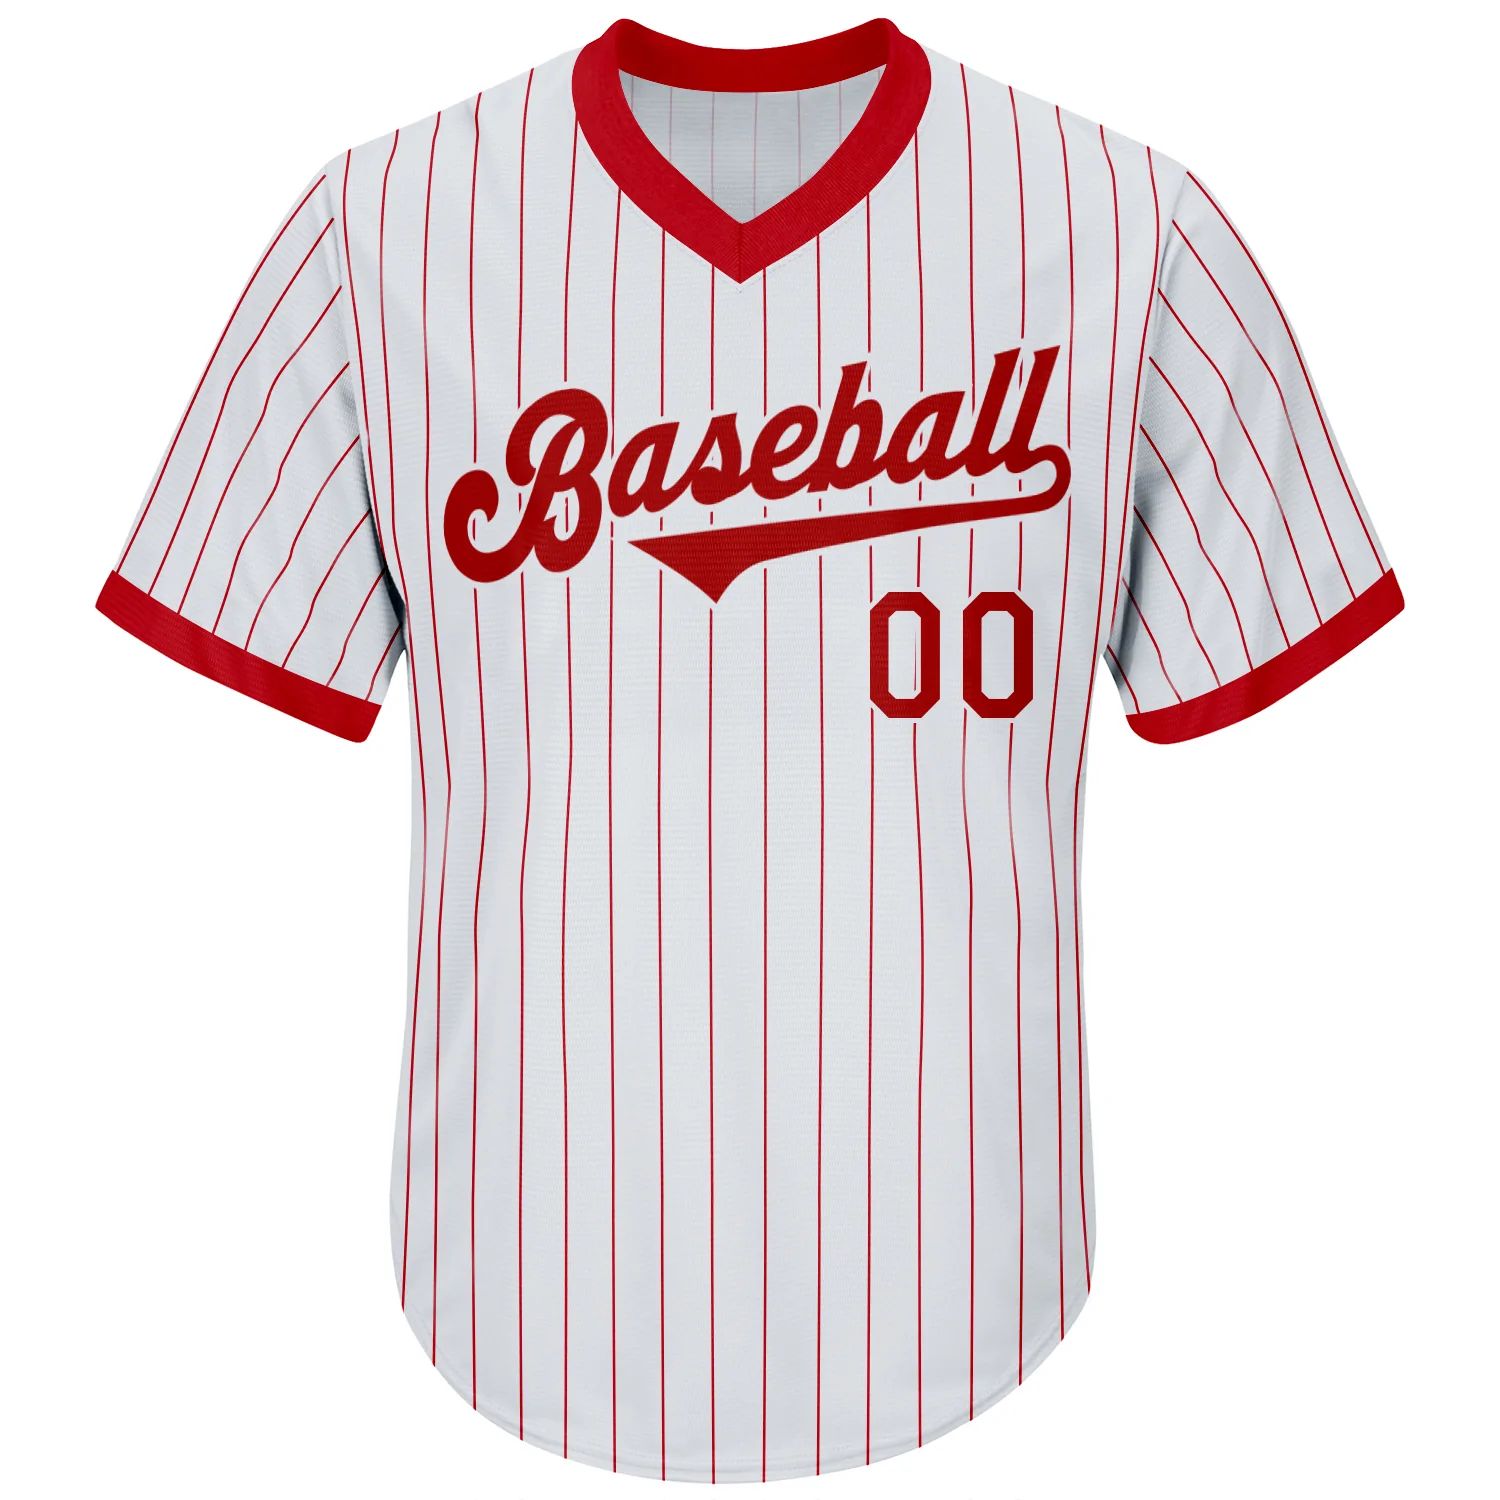 build-white-white-red-strip-baseball-red-jersey-authentic-throwback-ewhite02546-online-2.jpg